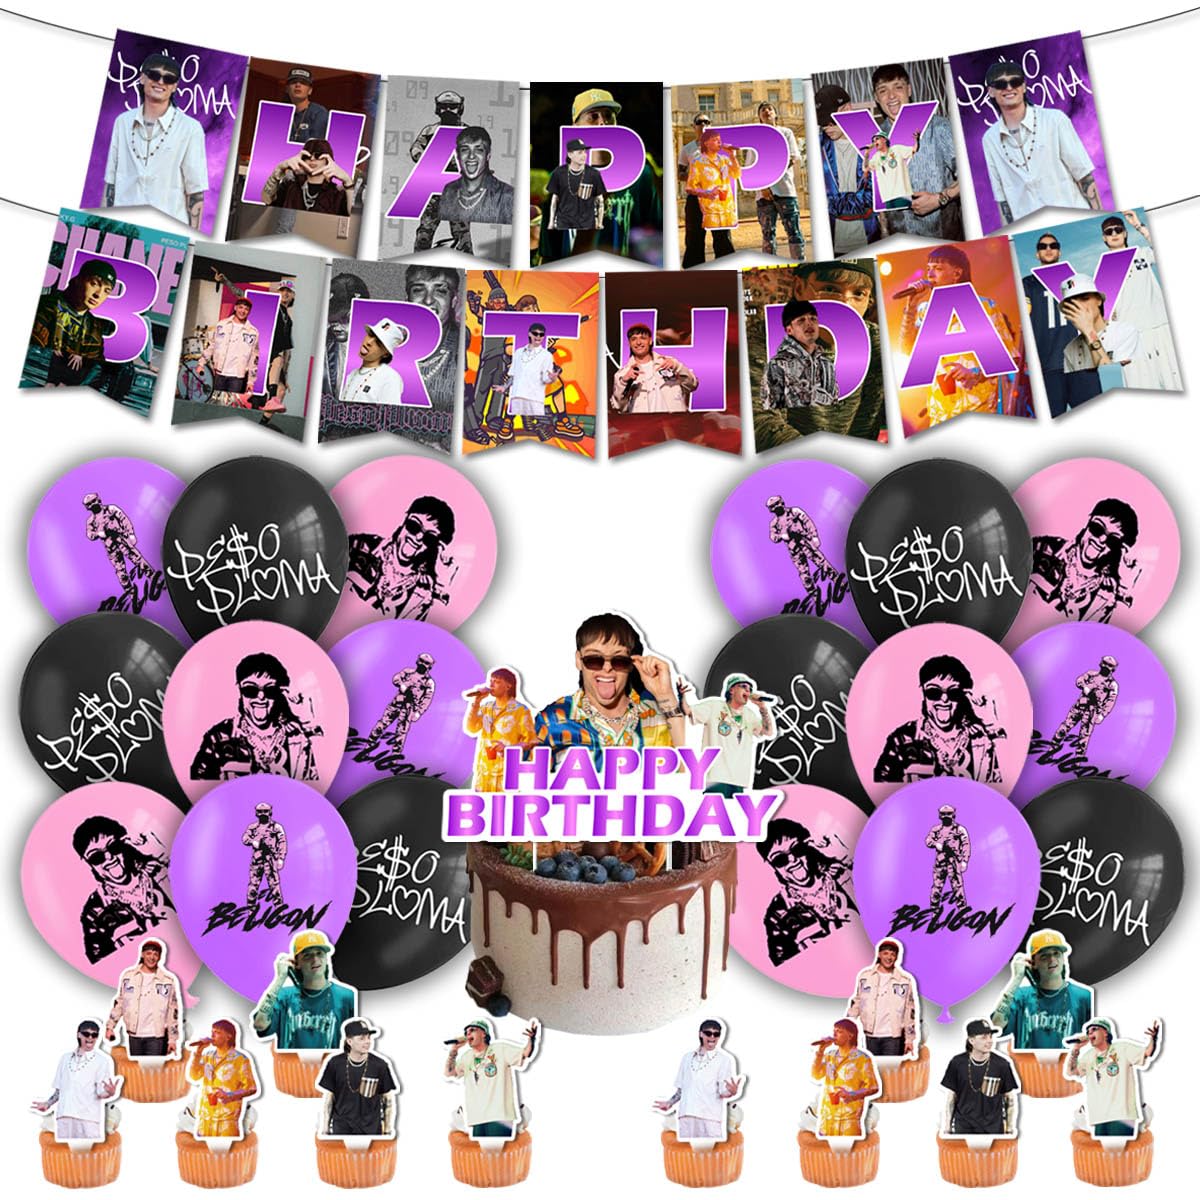 Celebrate Birthday Party Peso Pluma Style - Party Decorations Including Banner, Balloons, Cake Topper, and Cupcake Toppers